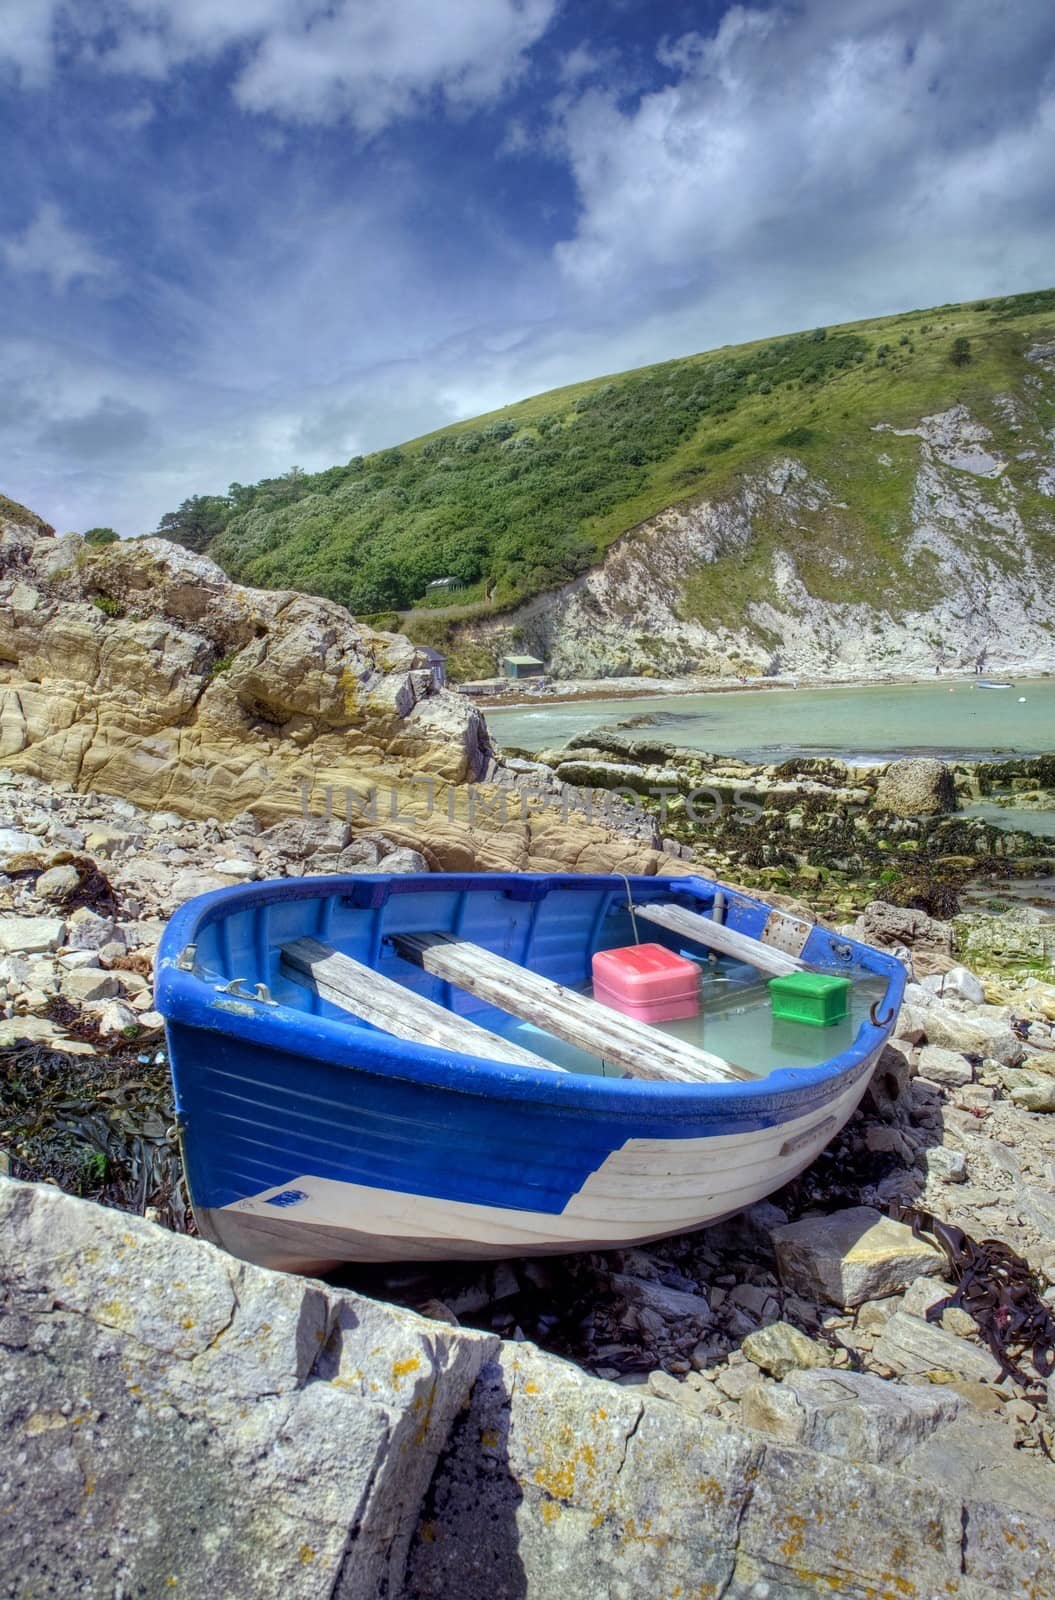 Lulworth Cove, Dorset by andrewroland